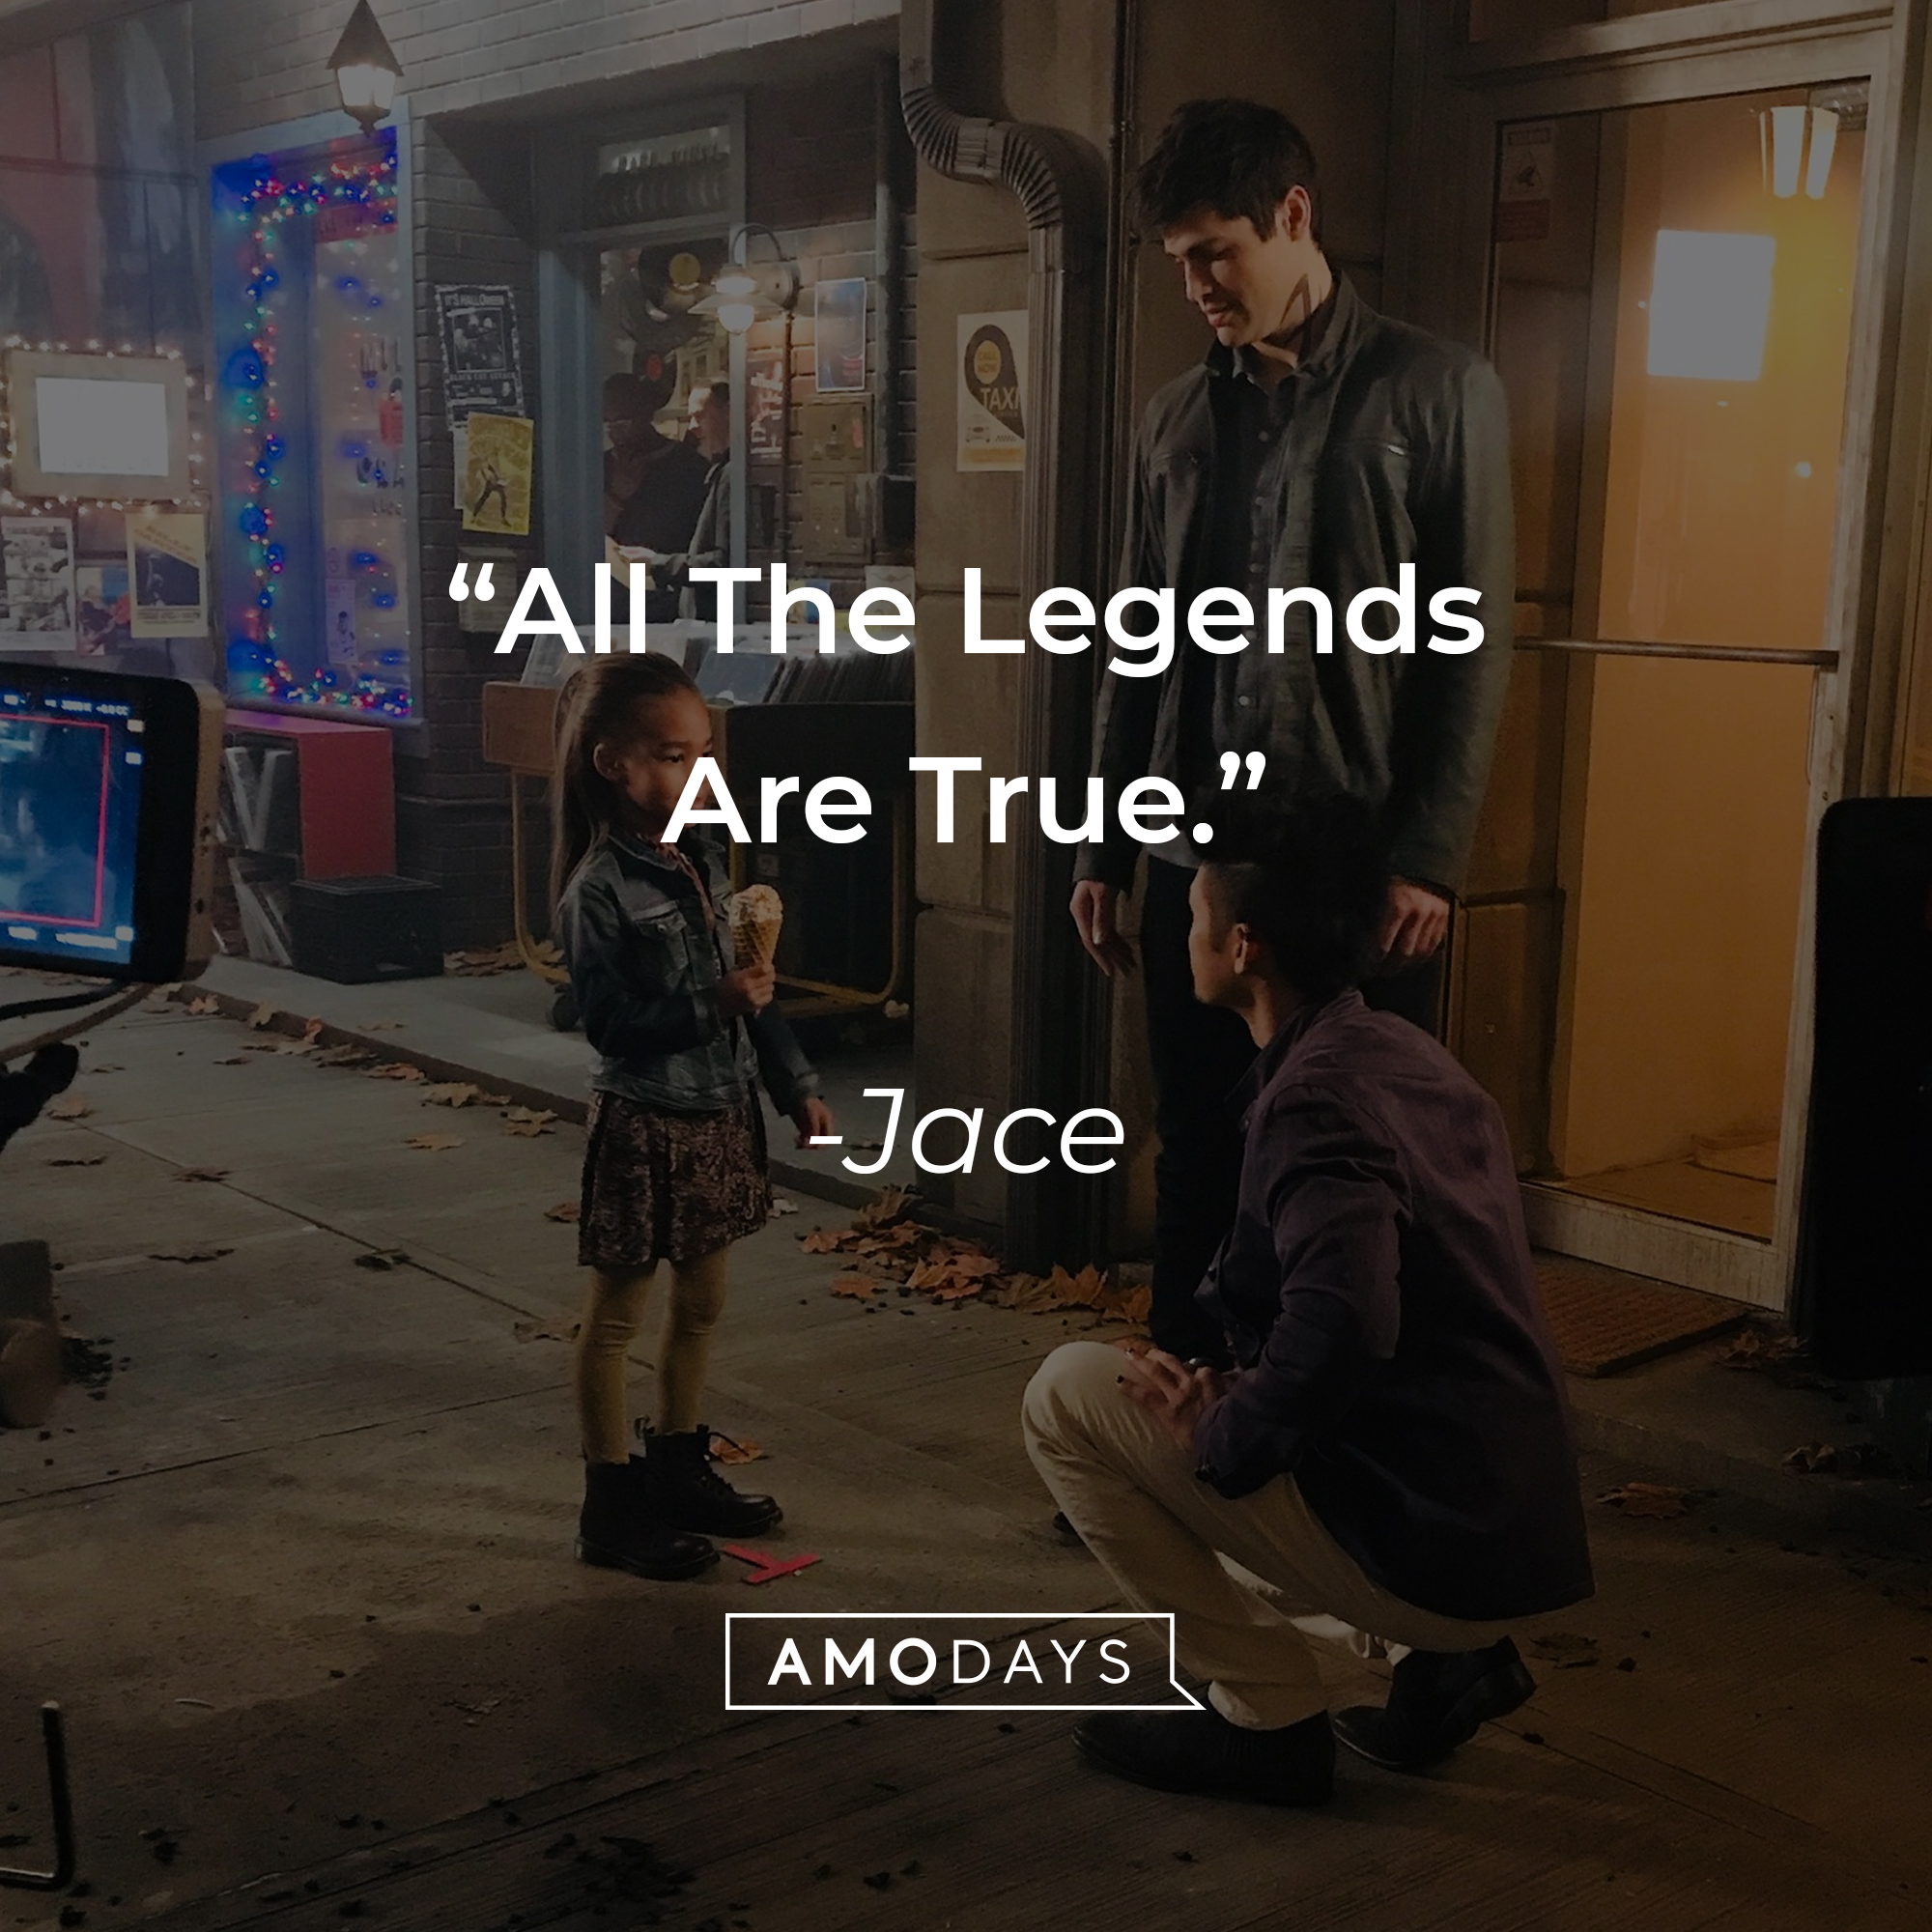 Jace's quote: "All The Legends Are True."┃Source: facebook.com/ShadowhuntersSeries